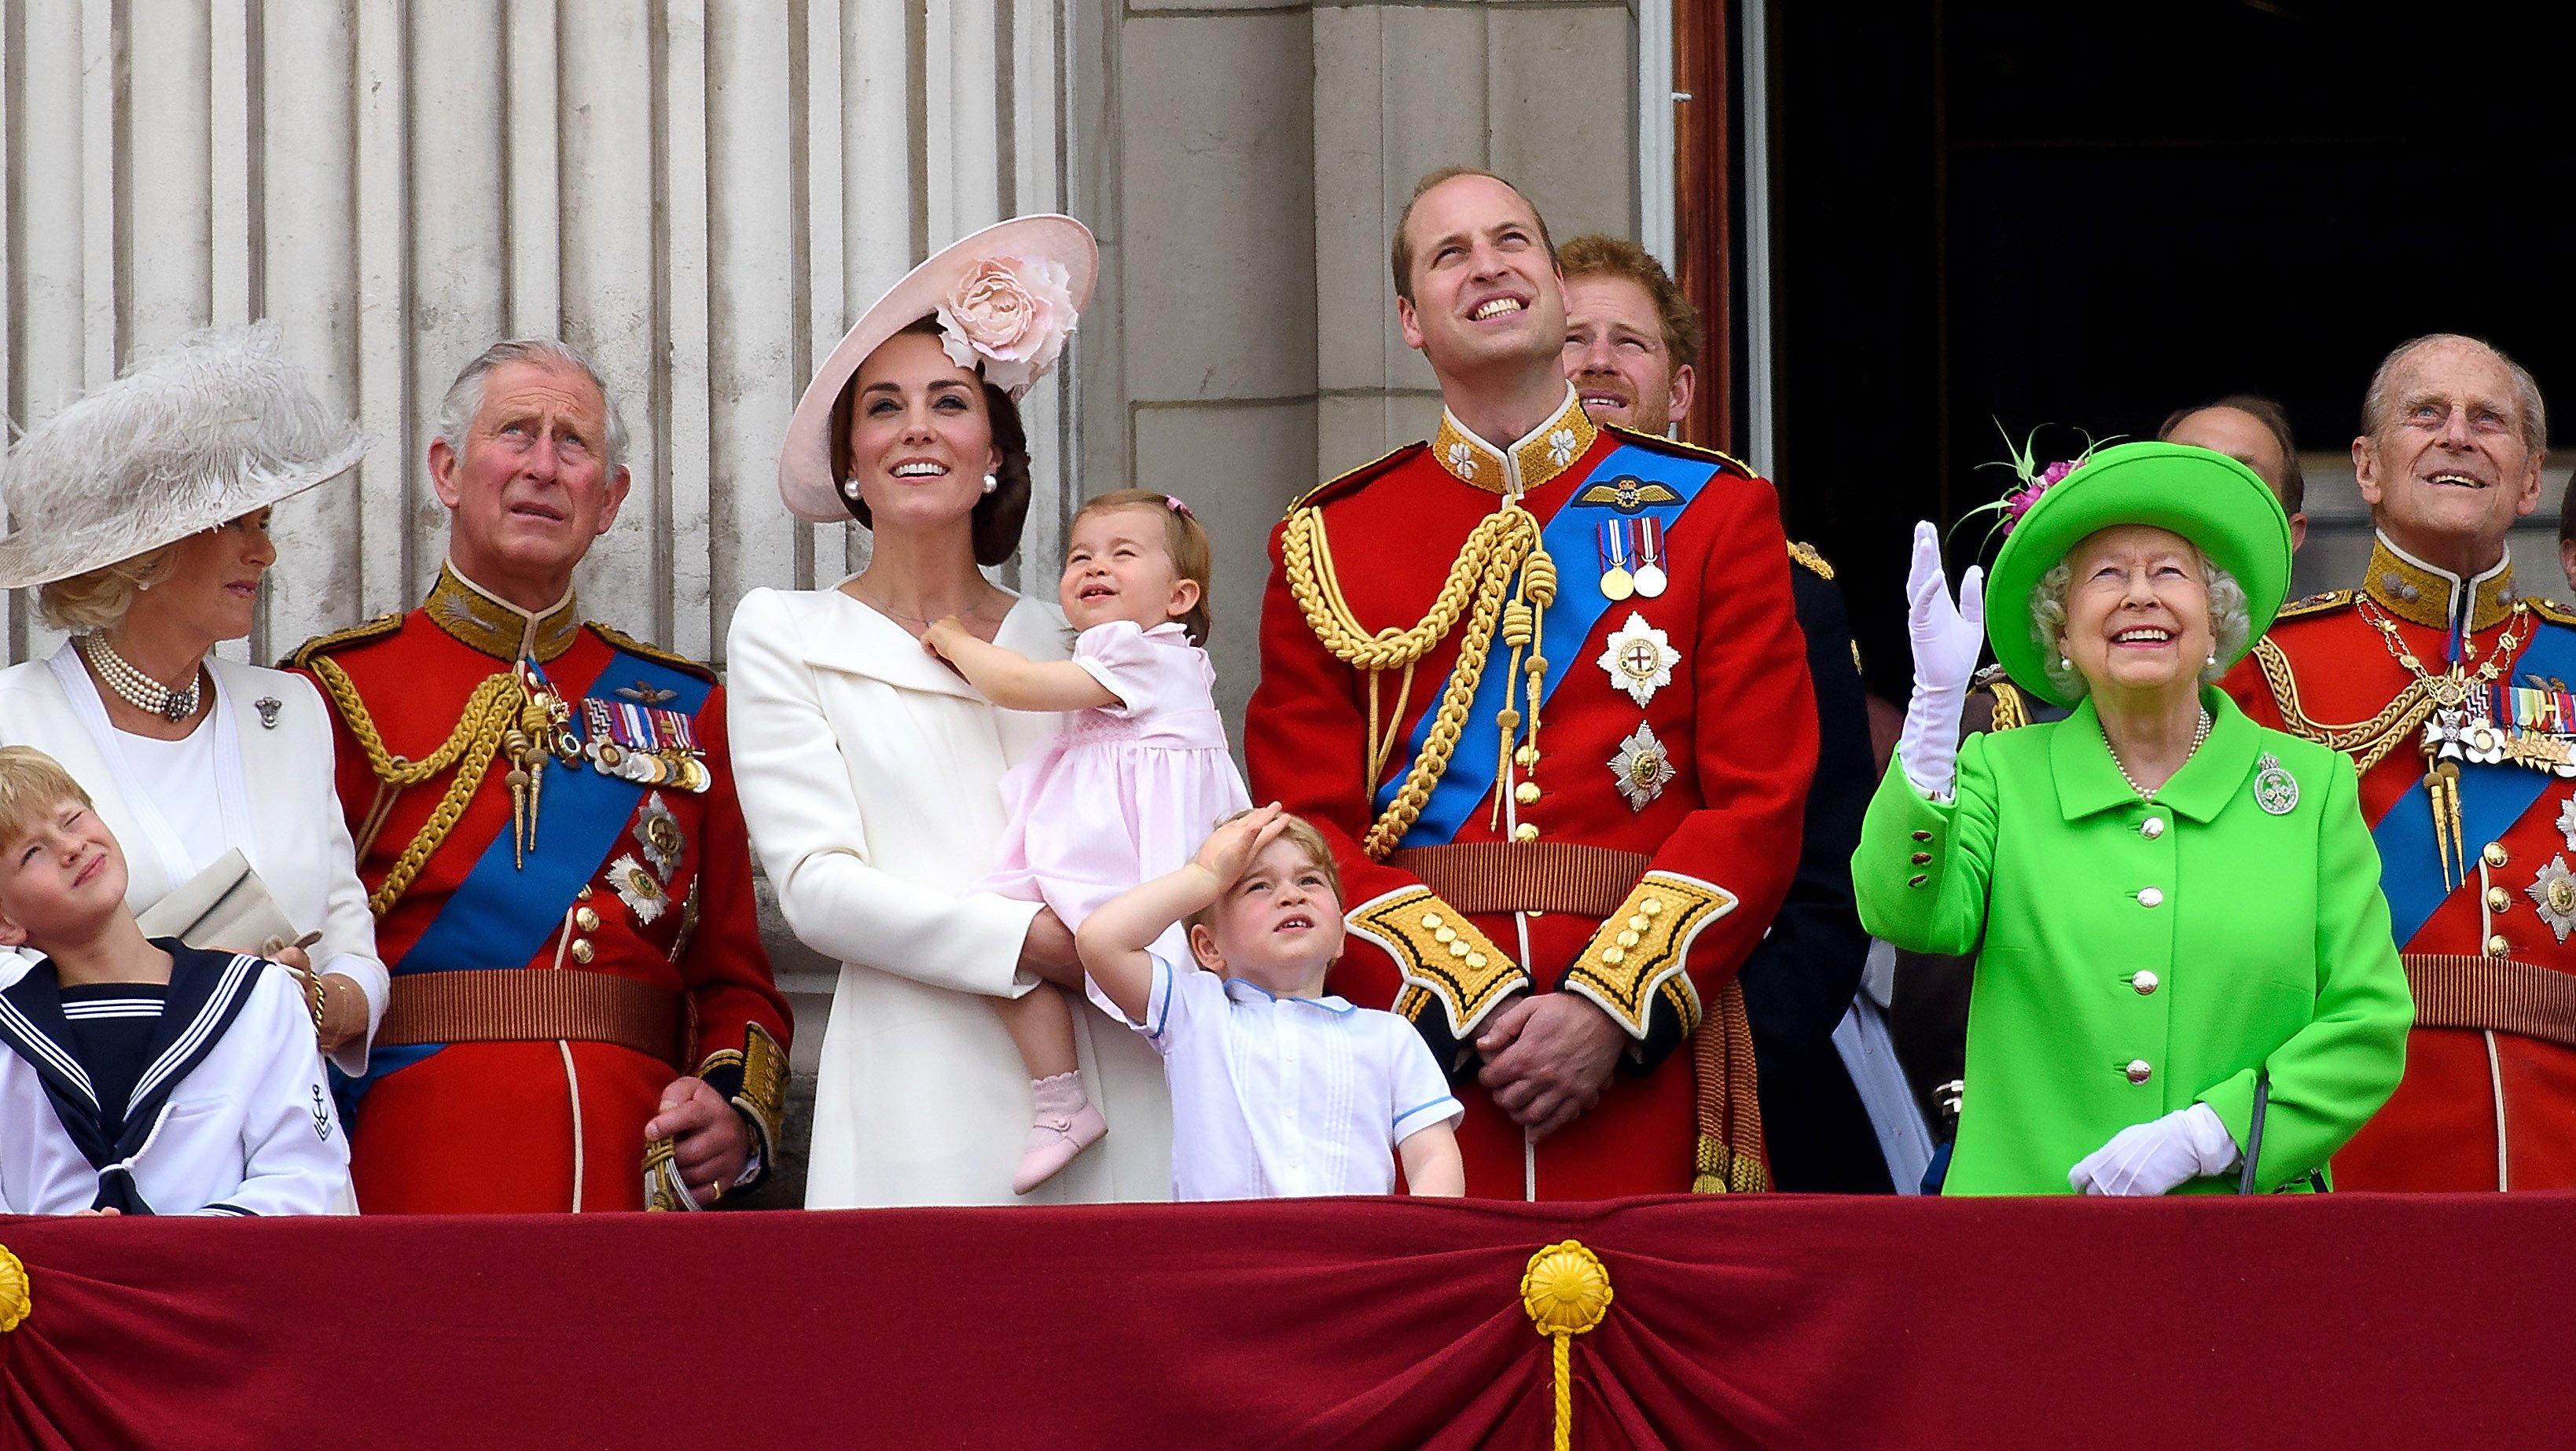 Senior members of the royal family stand on the balcony during the Trooping the Colour on June 11, 2016, in London, England. | Source: Getty Images.